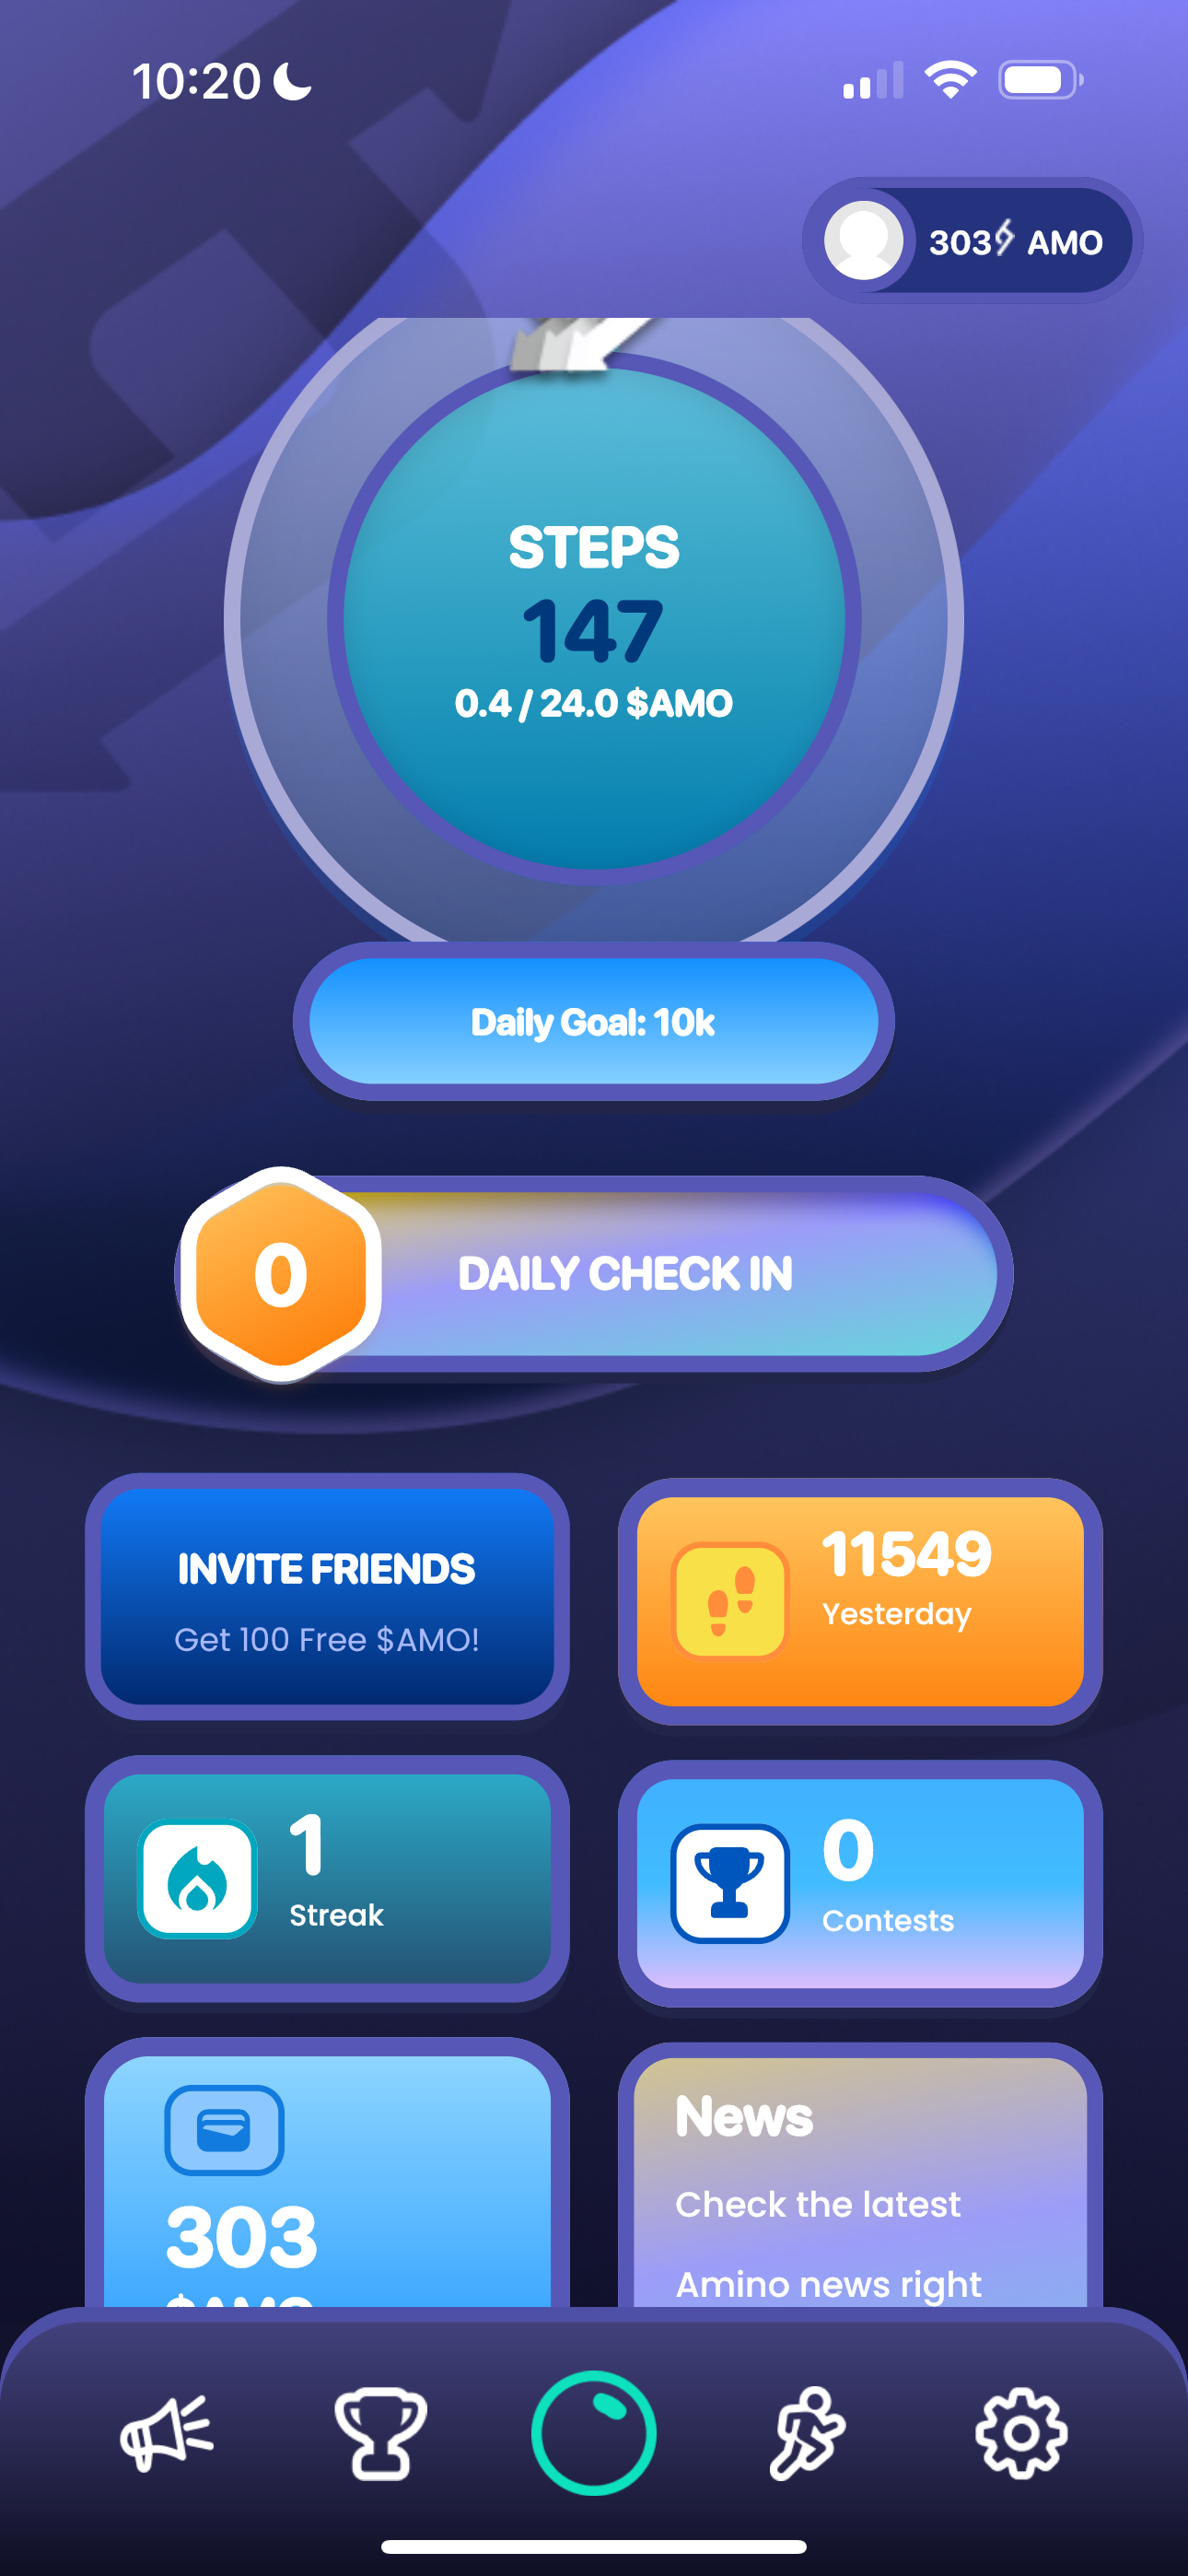 On the Amino Move home screen, users can see the number of steps they have taken toward their daily goal at the bottom. Additionally, they have the option to modify their daily goal and invite other players to join